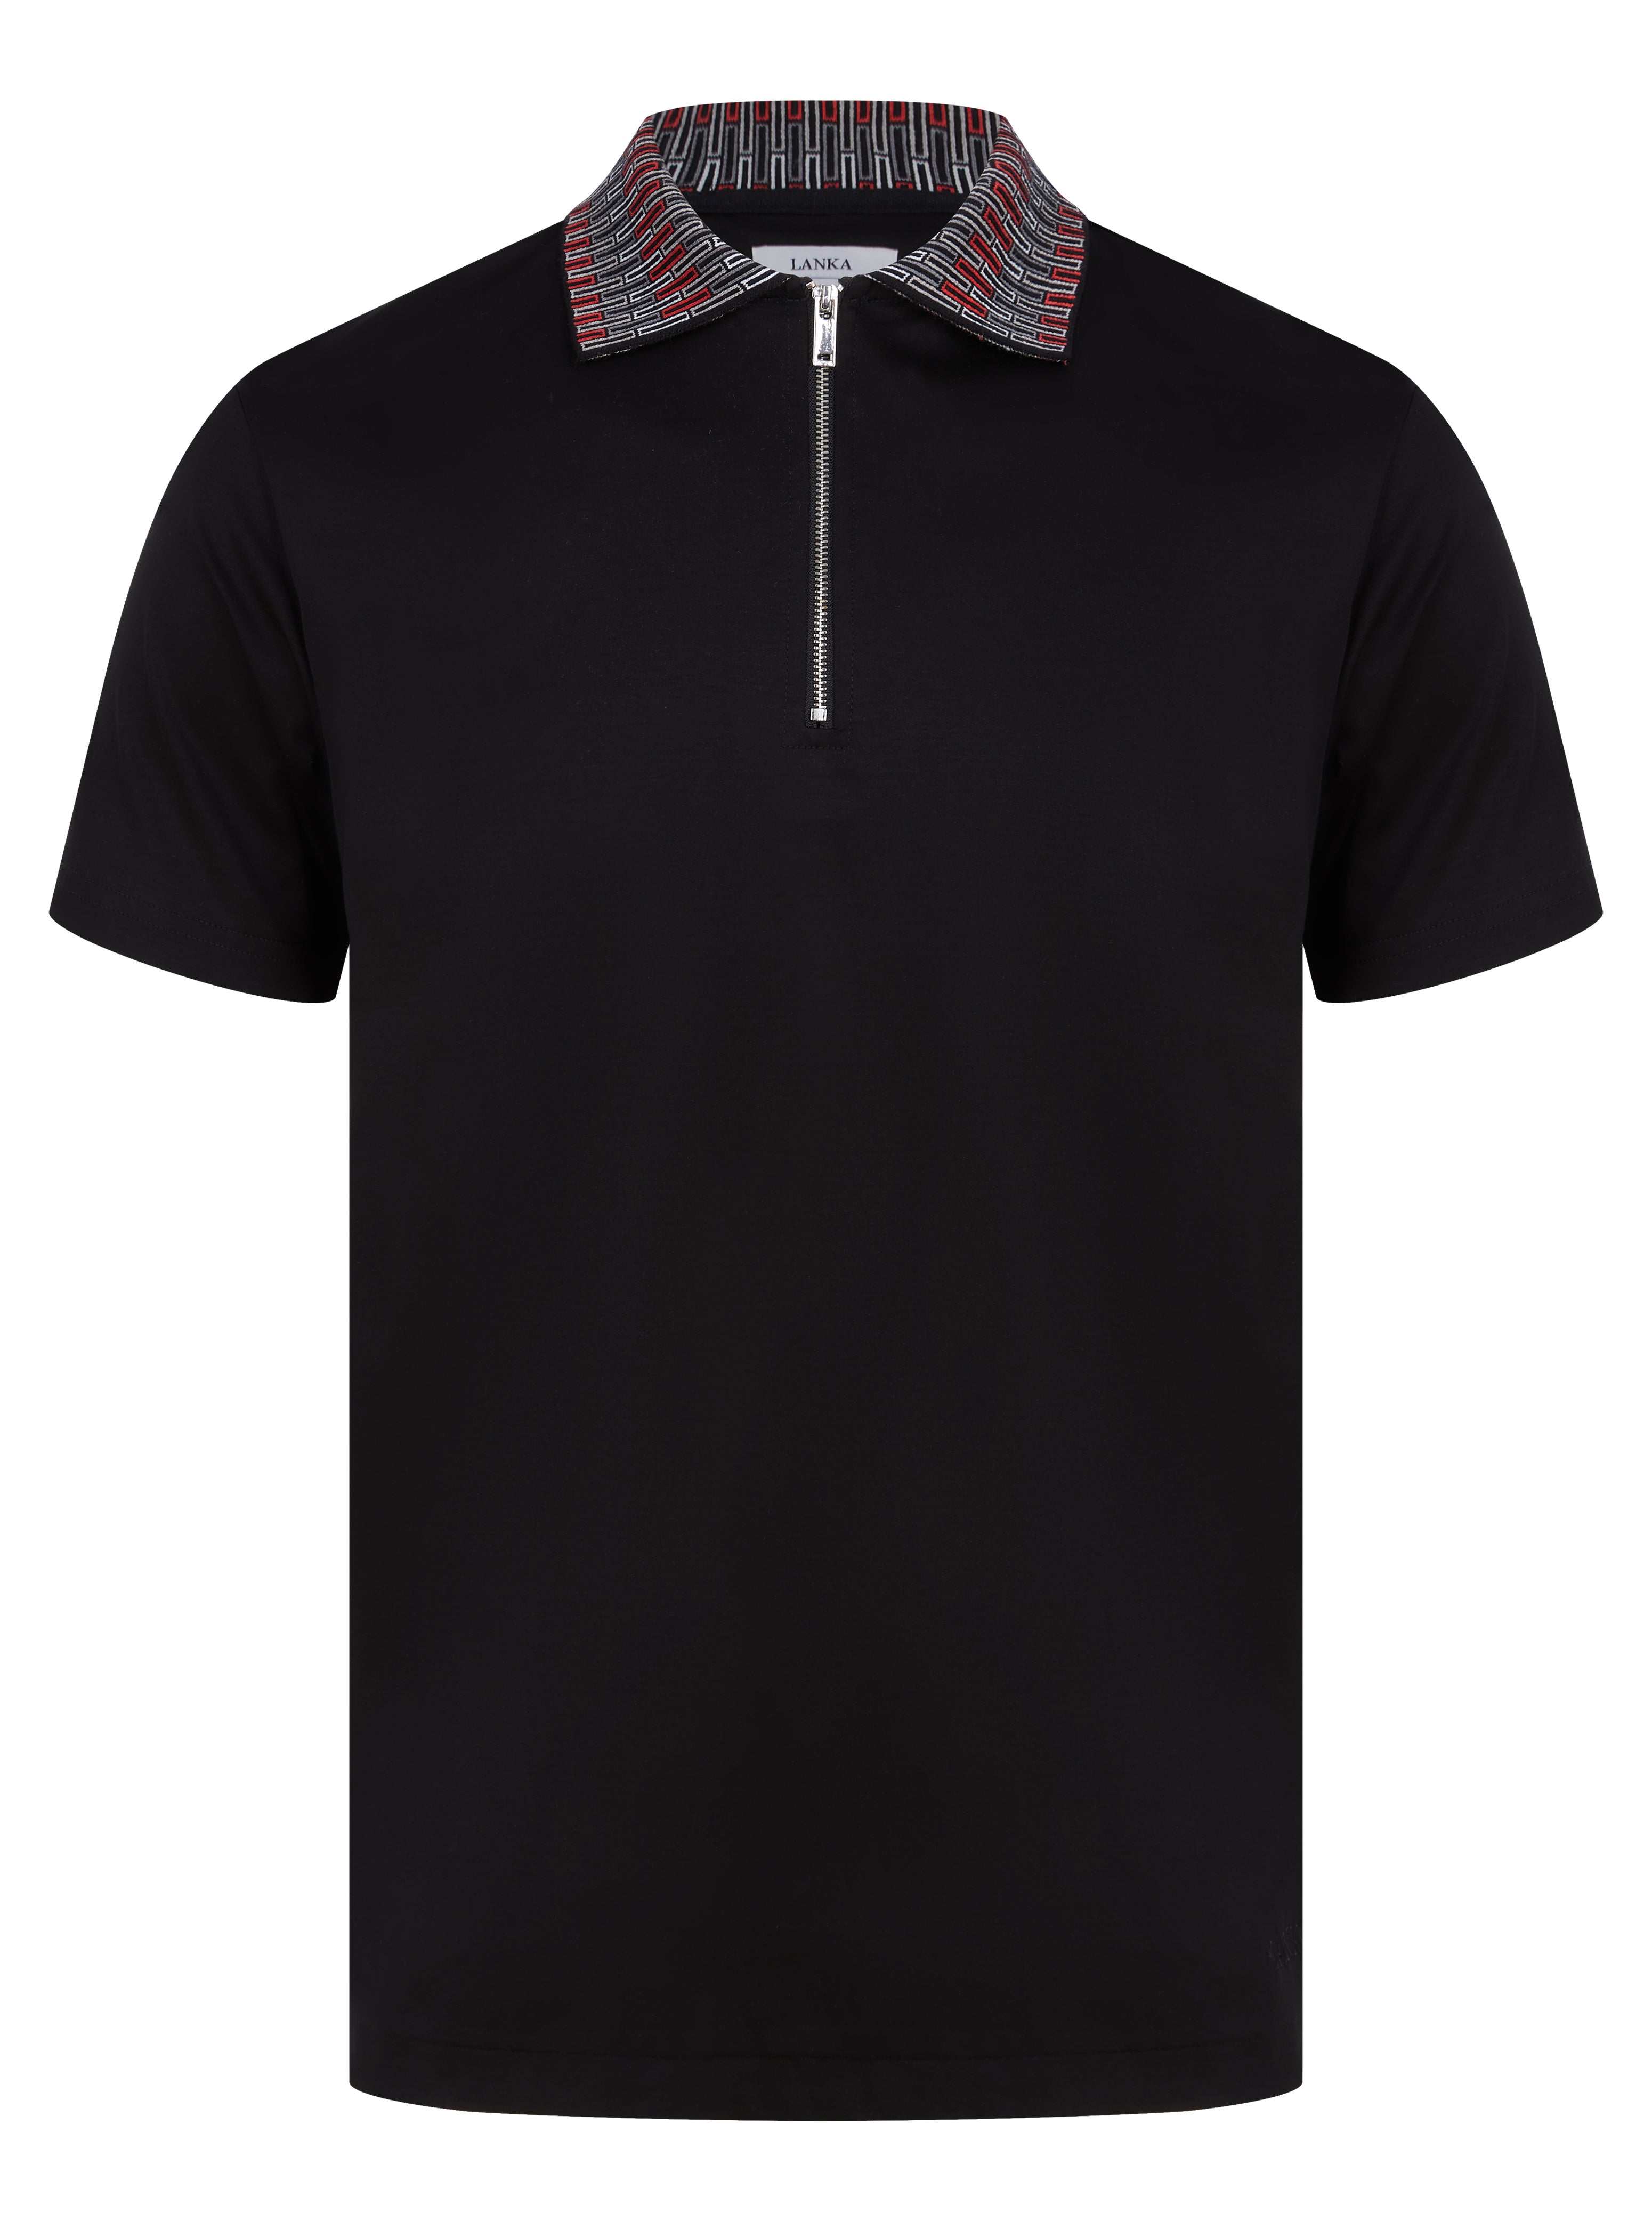 Load image into Gallery viewer, Lanka Zip Polo Black
